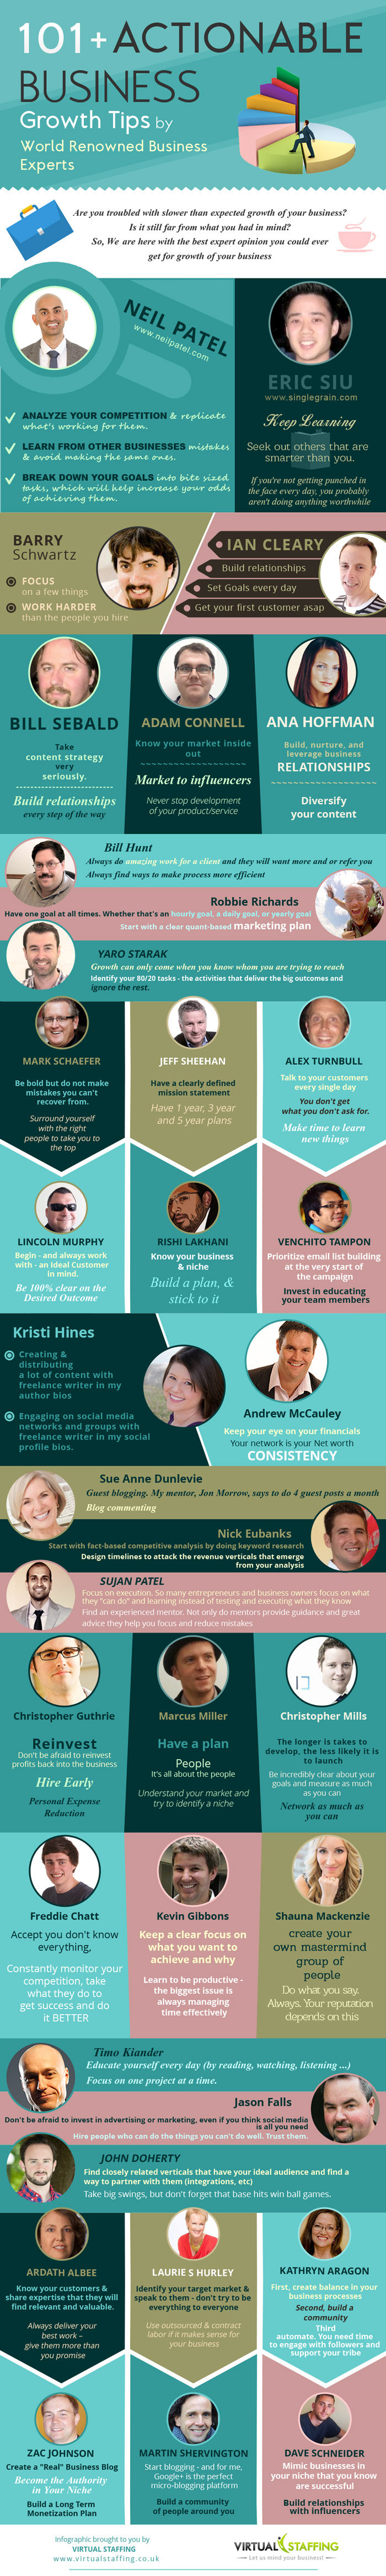 Business growth tips infographic